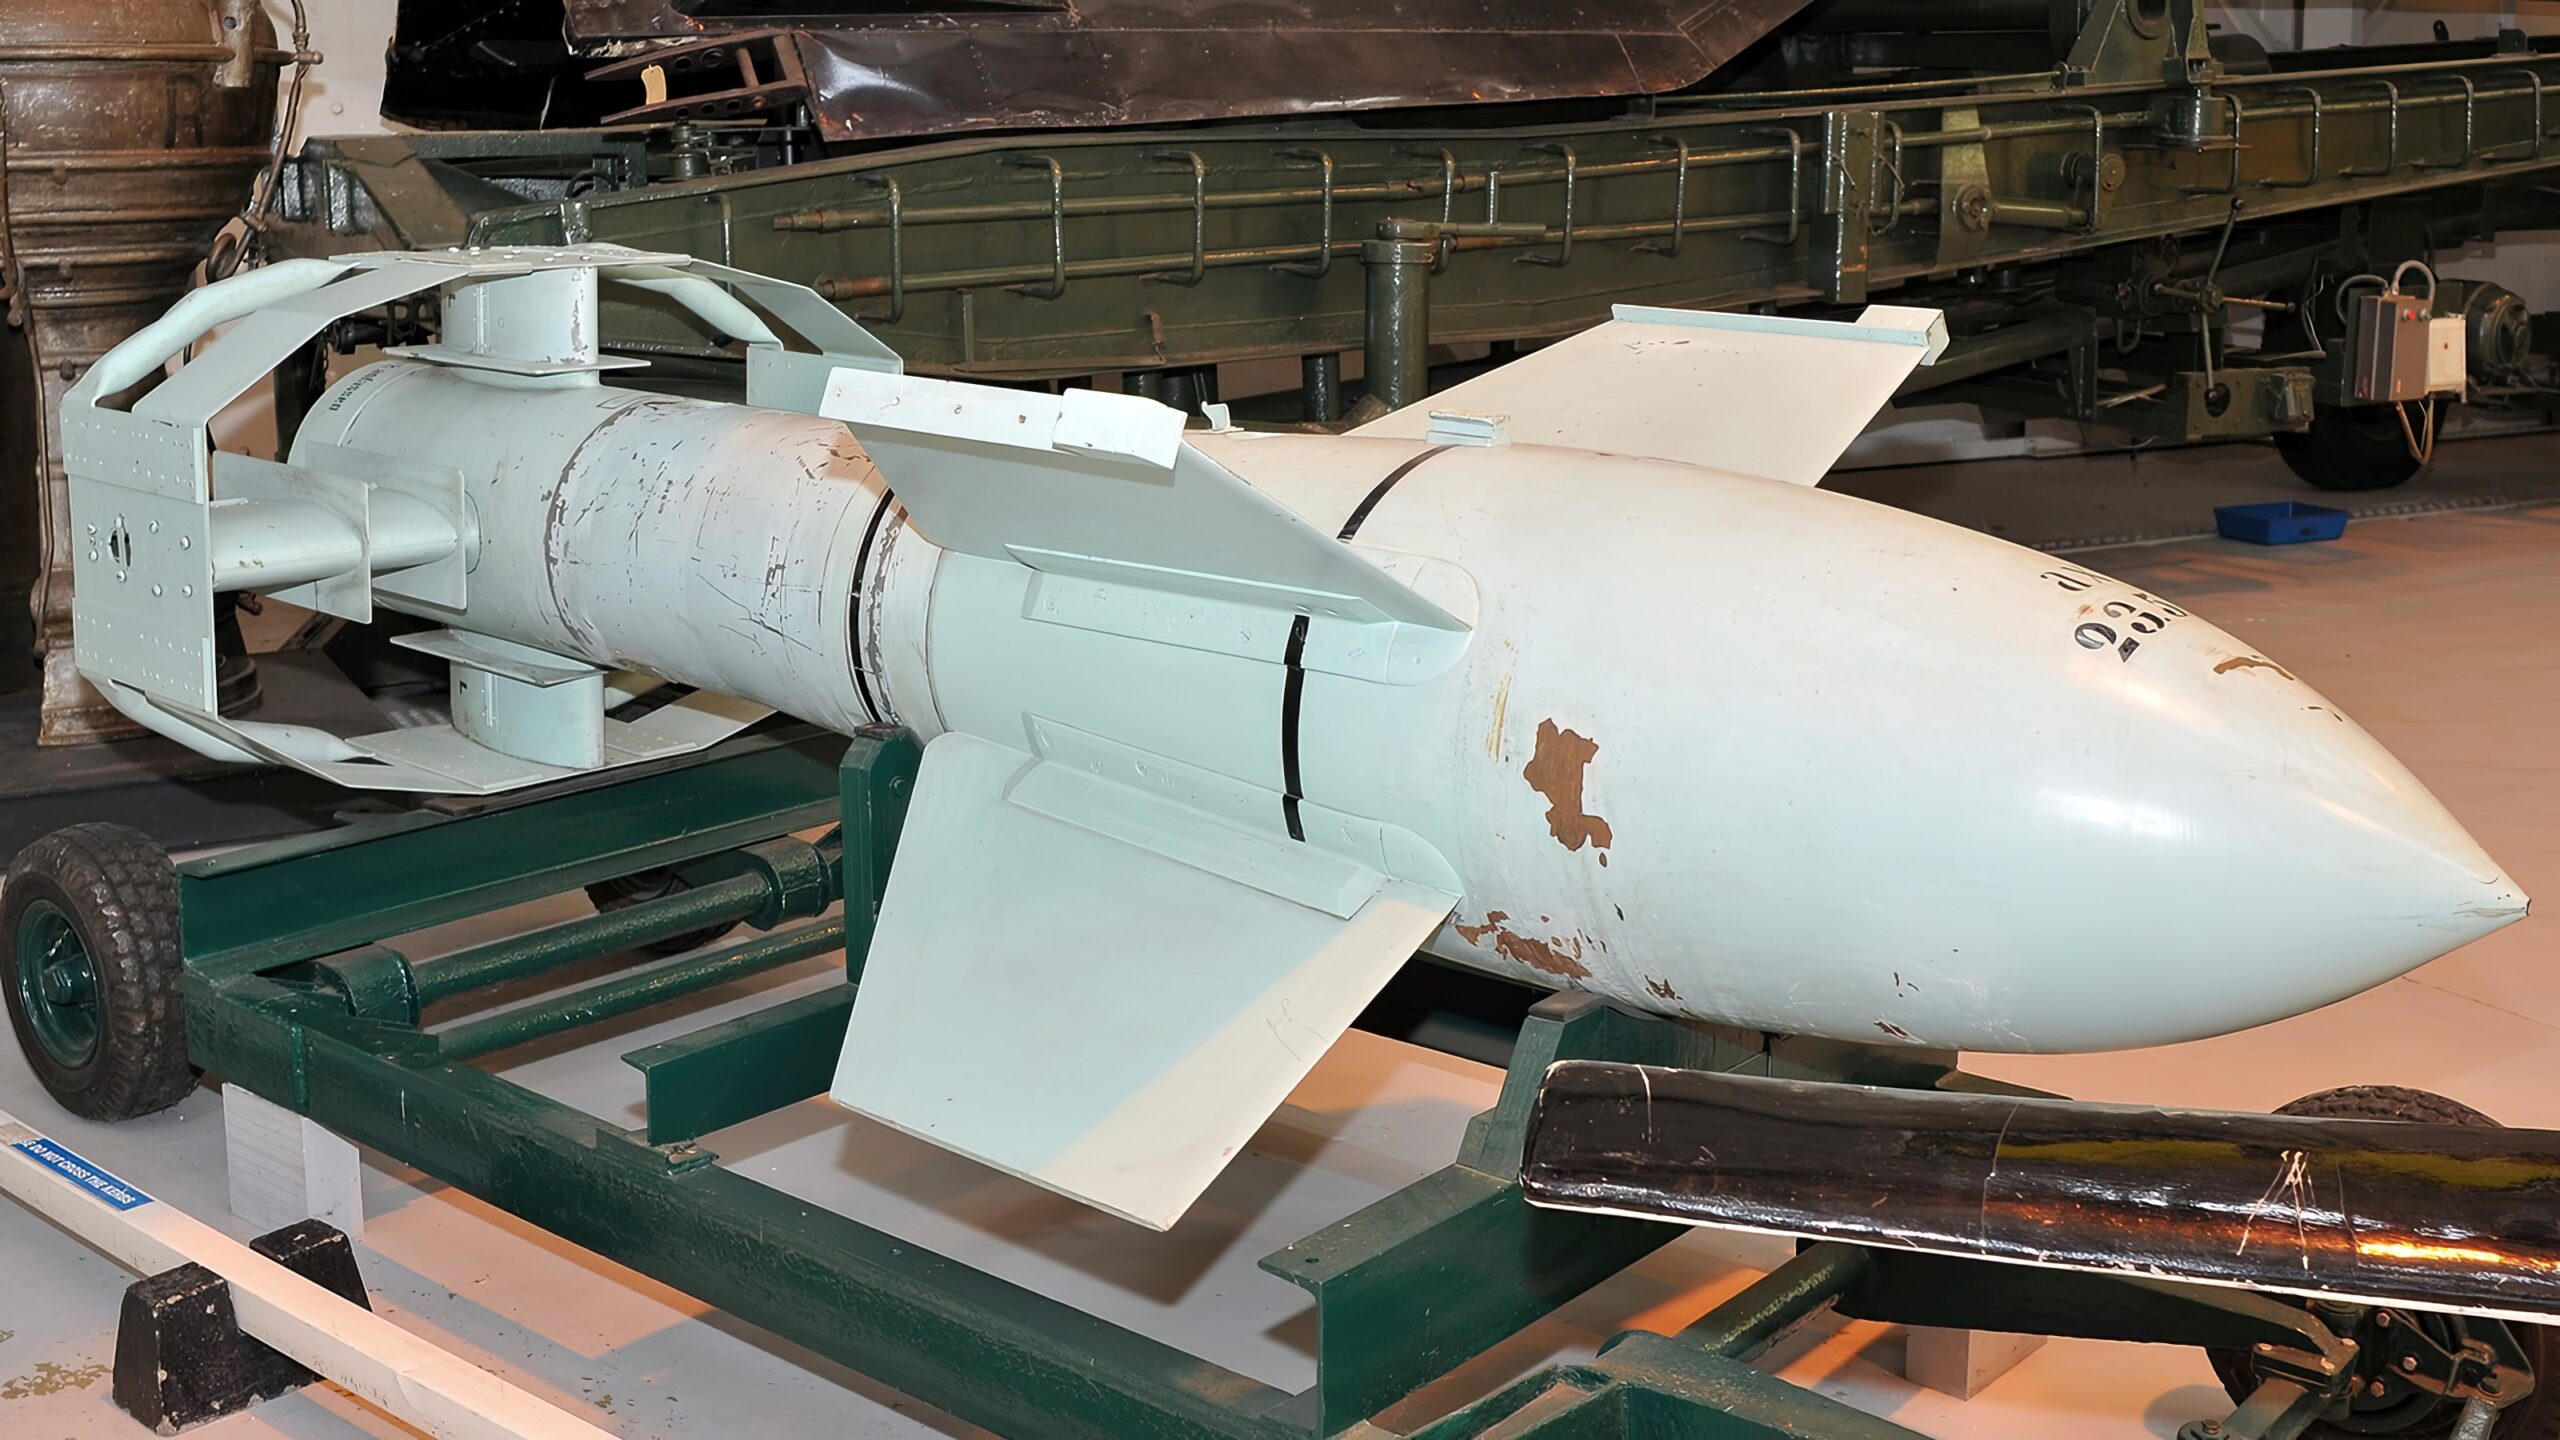 Fritz-X at RAF Museum Cosford, England